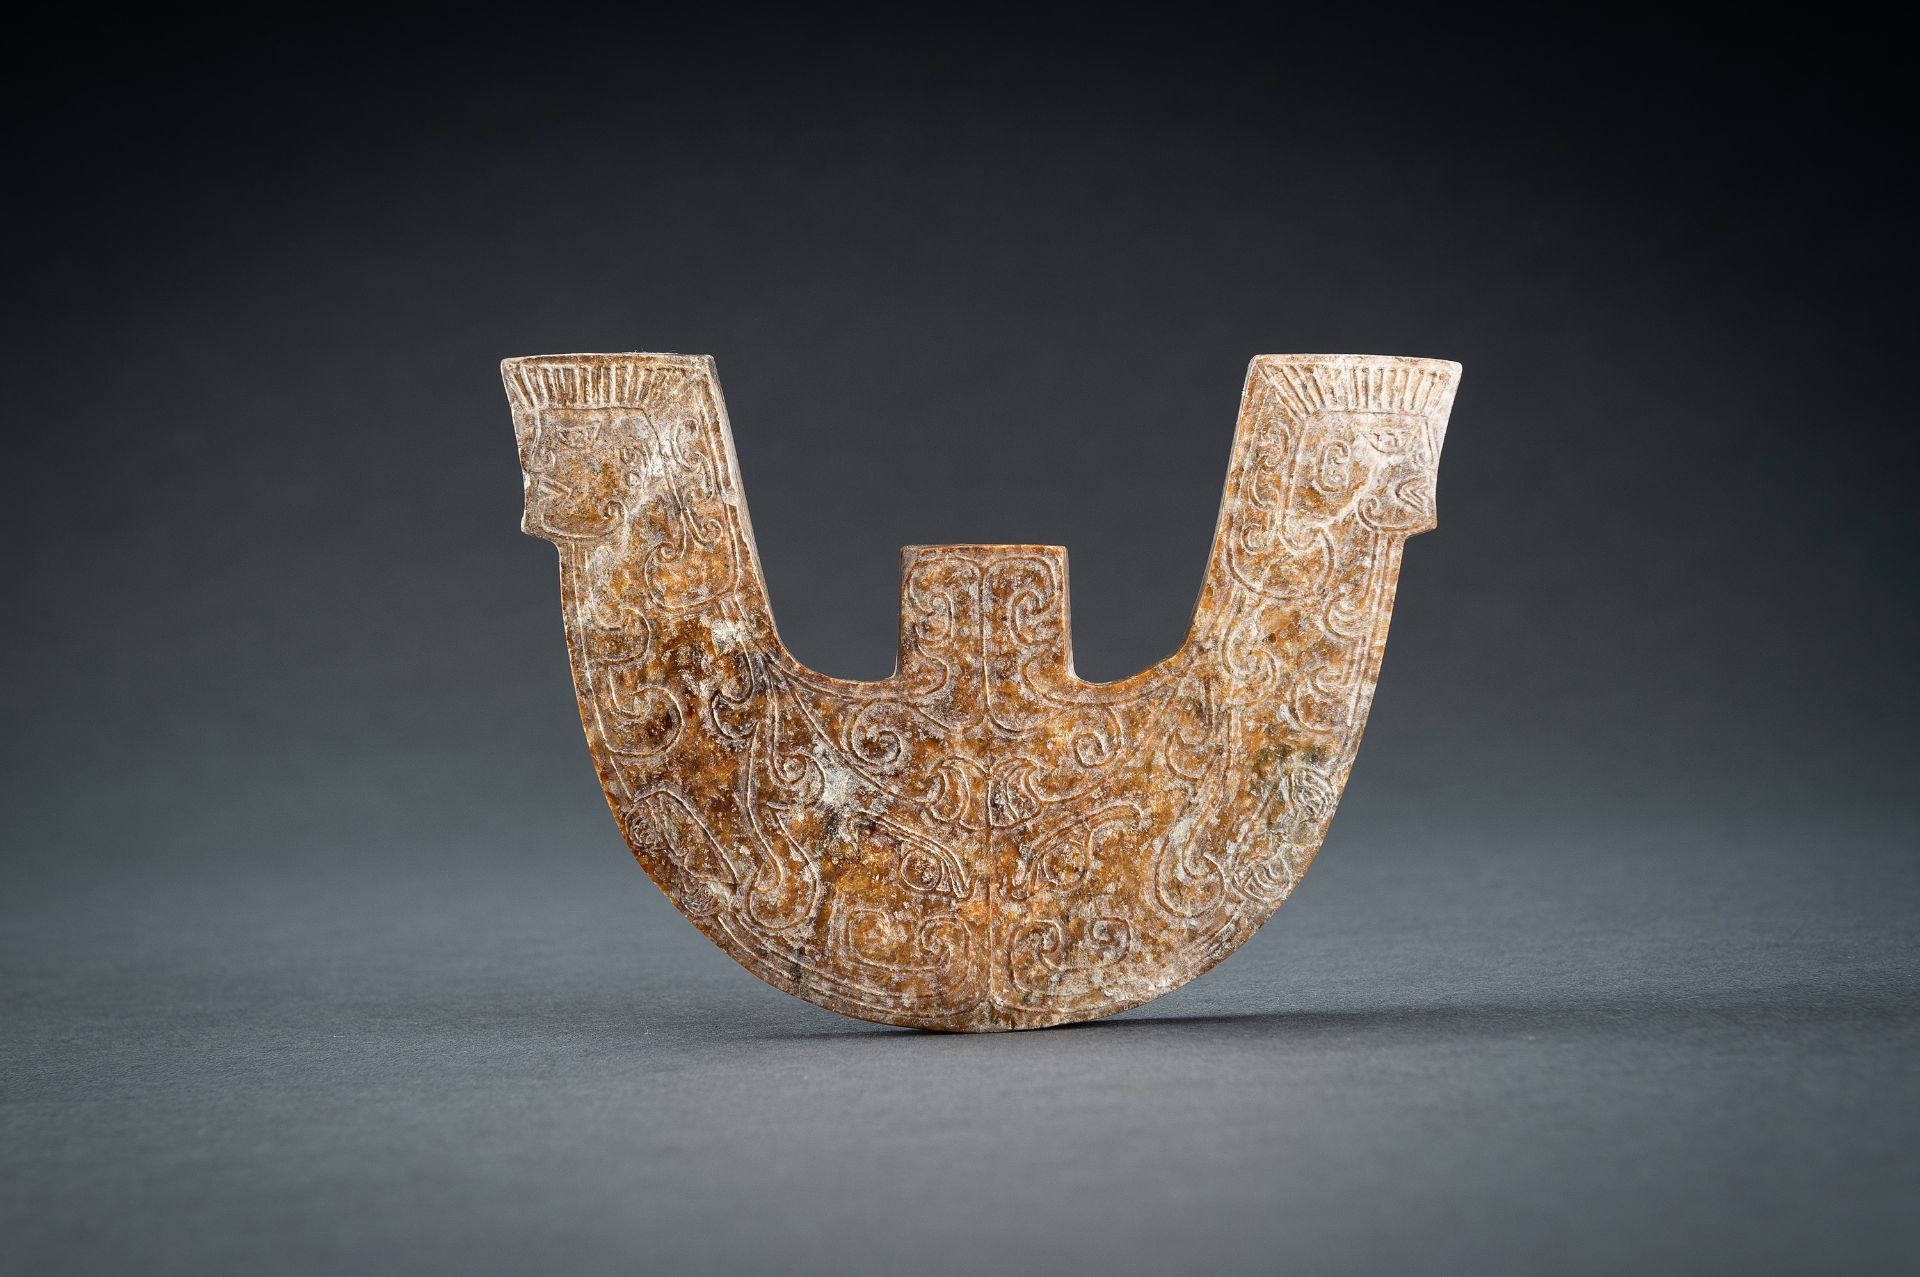 AN ARCHAISTIC THREE-PRONGED JADE ORNAMENT, QING - Image 12 of 16